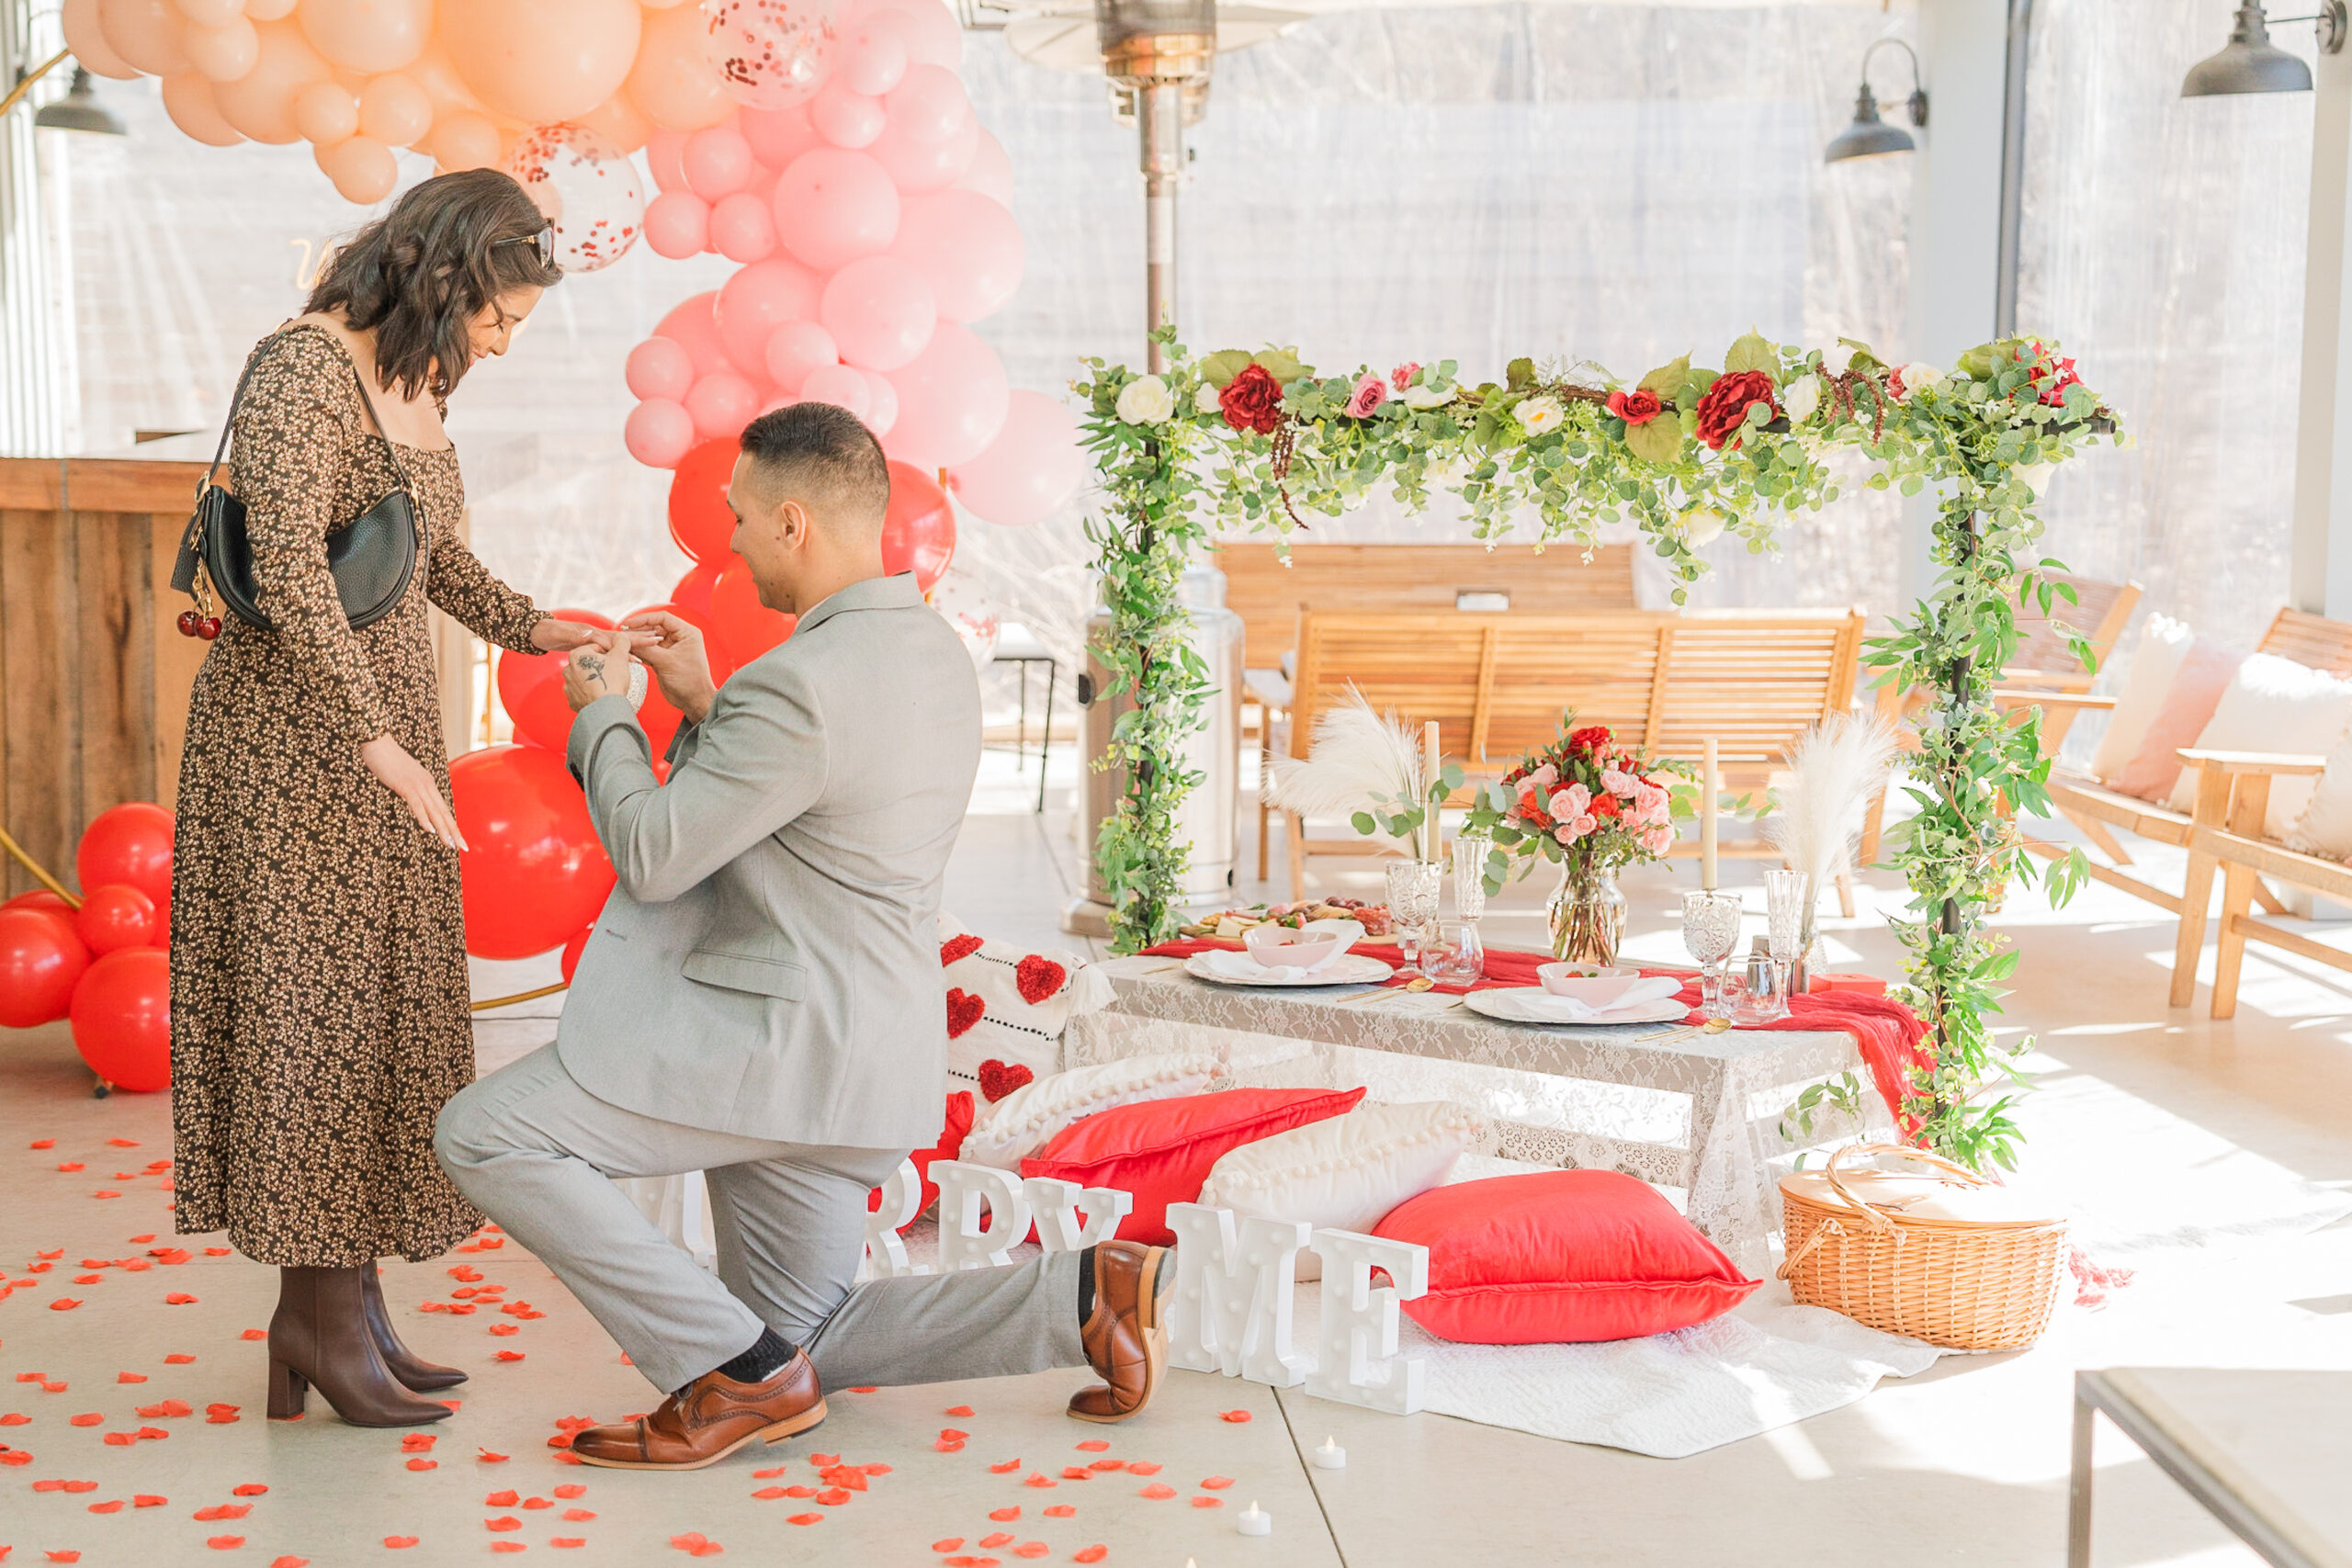 A guy kneeling down putting a ring on the left hand of a woman. The guy wearing a casual suit and the woman is wearing a brown long dress with a dark brown booties and close to them is a picnic table with full of flowers and a charcuterie board and a balloon arch background